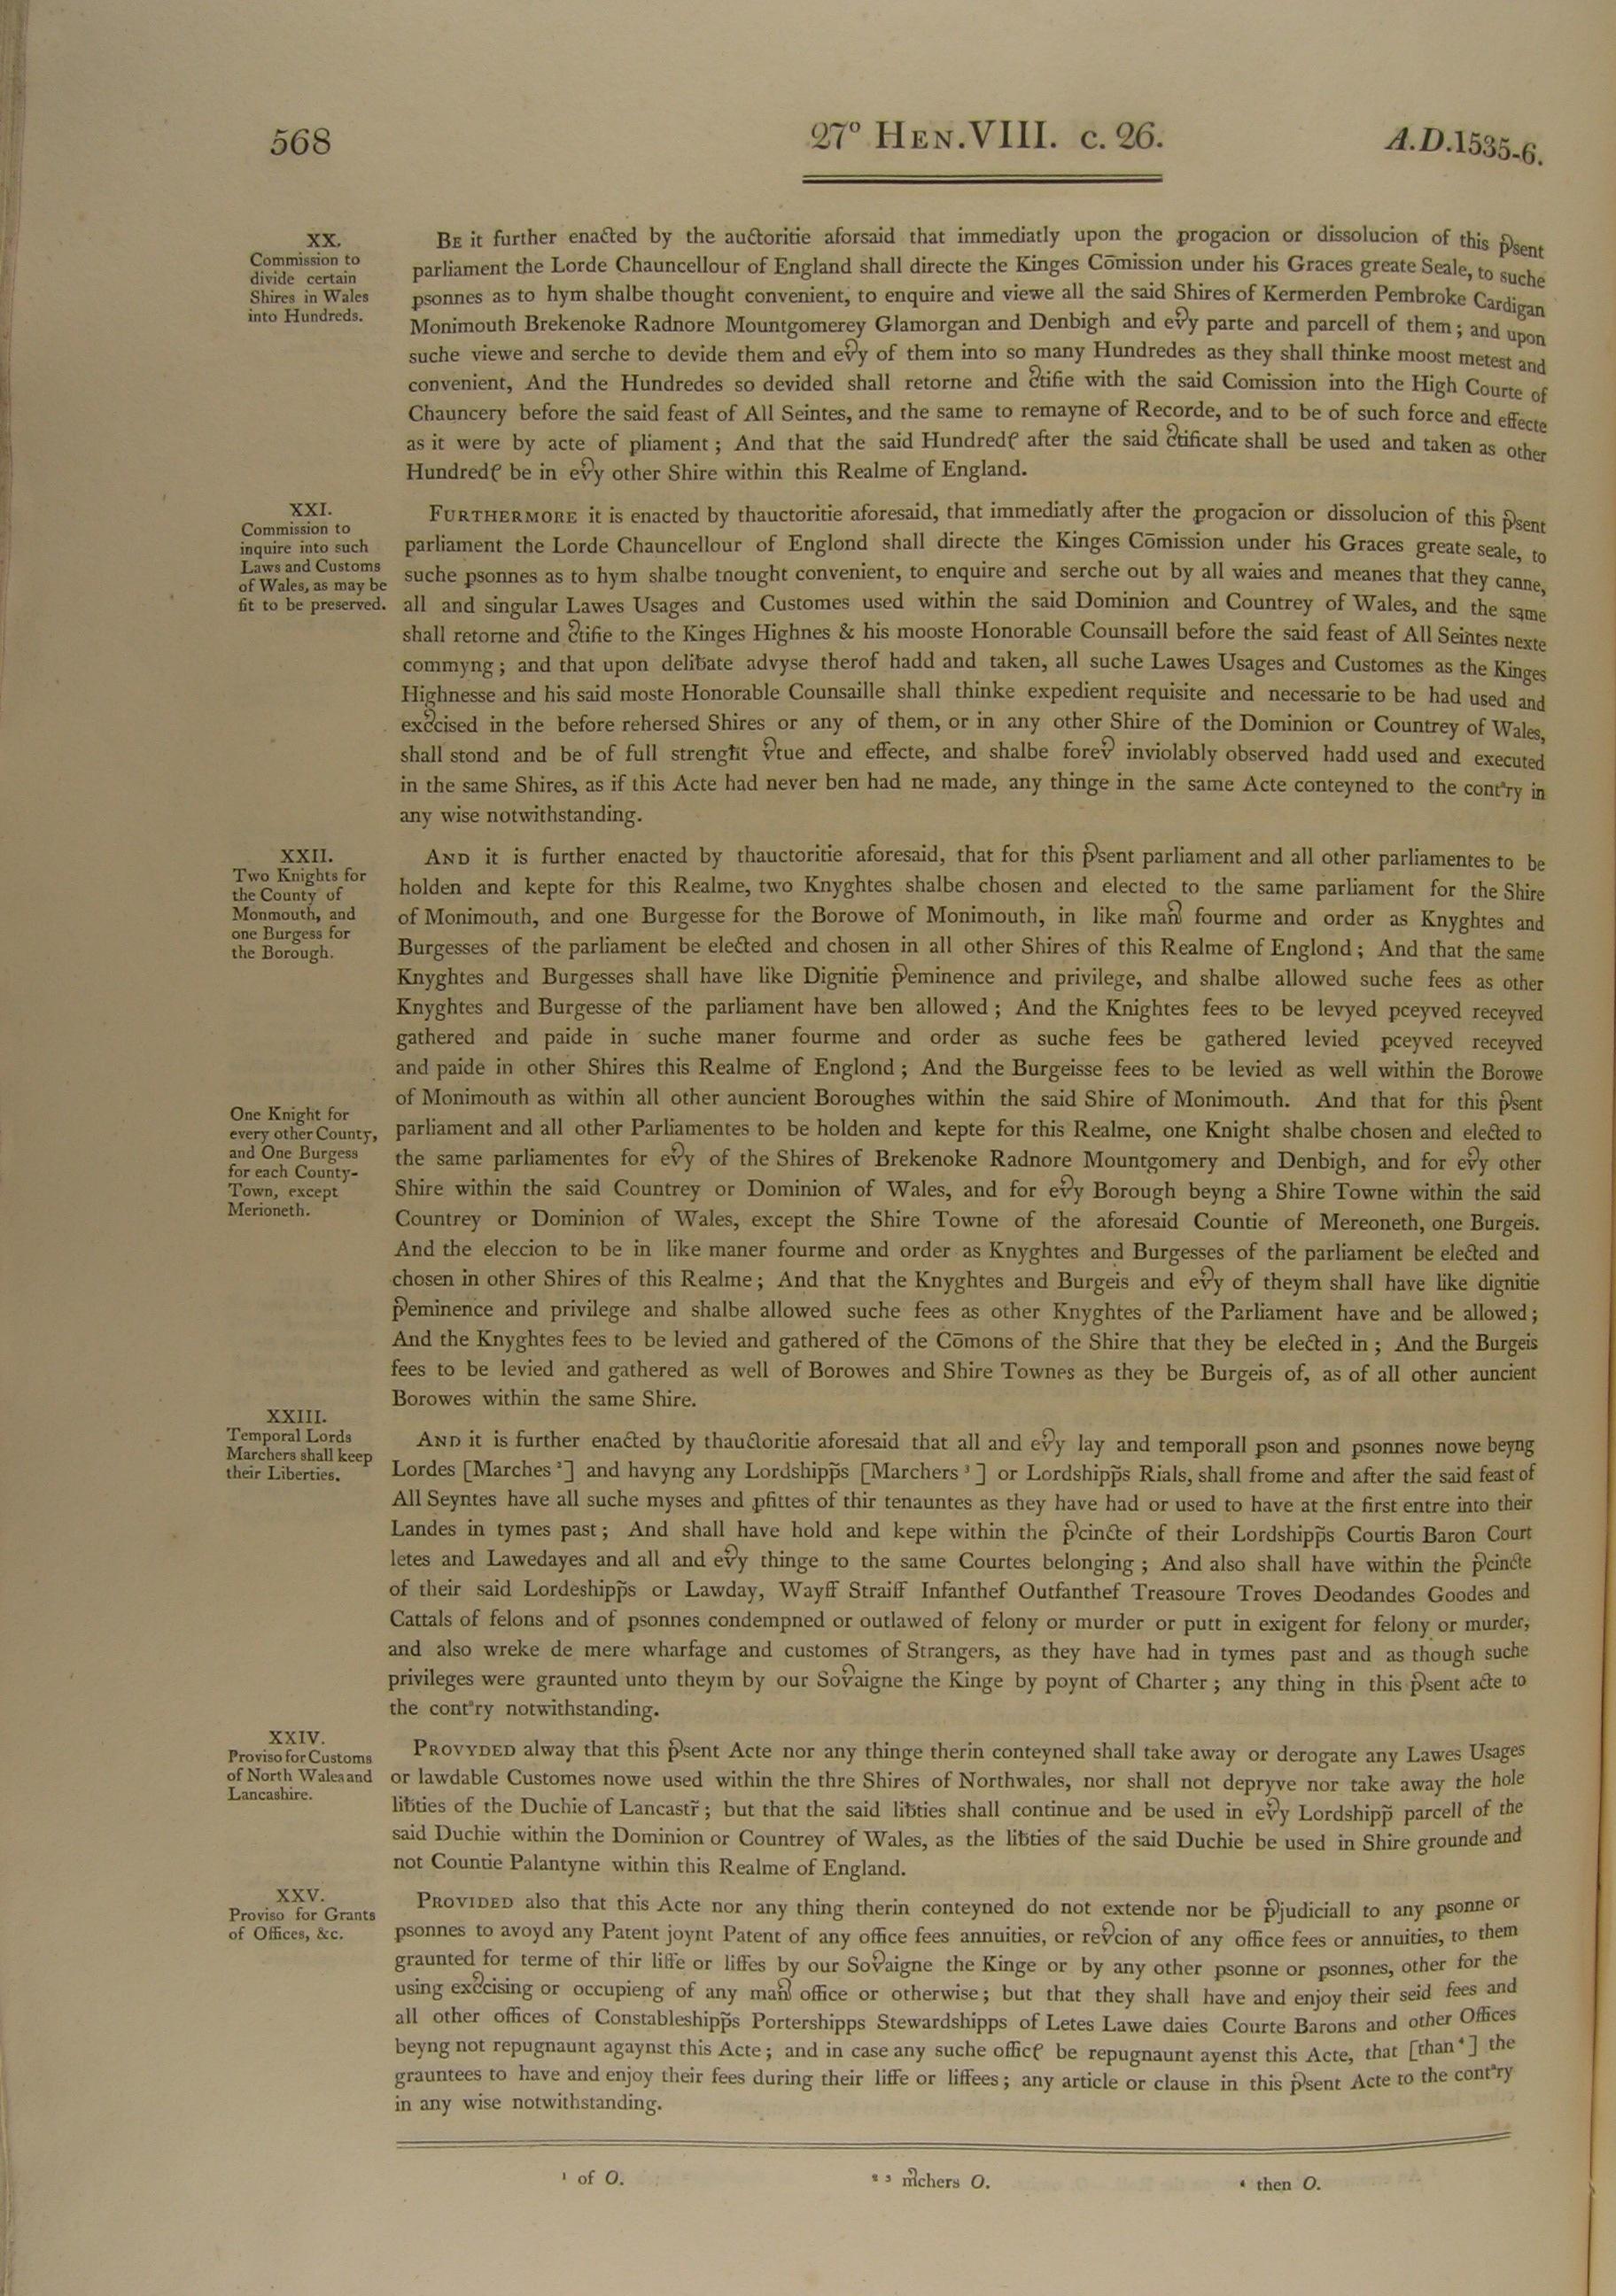 Image of 27 Henry VIII, c. 26 (page 6 of 7). Click for larger image.